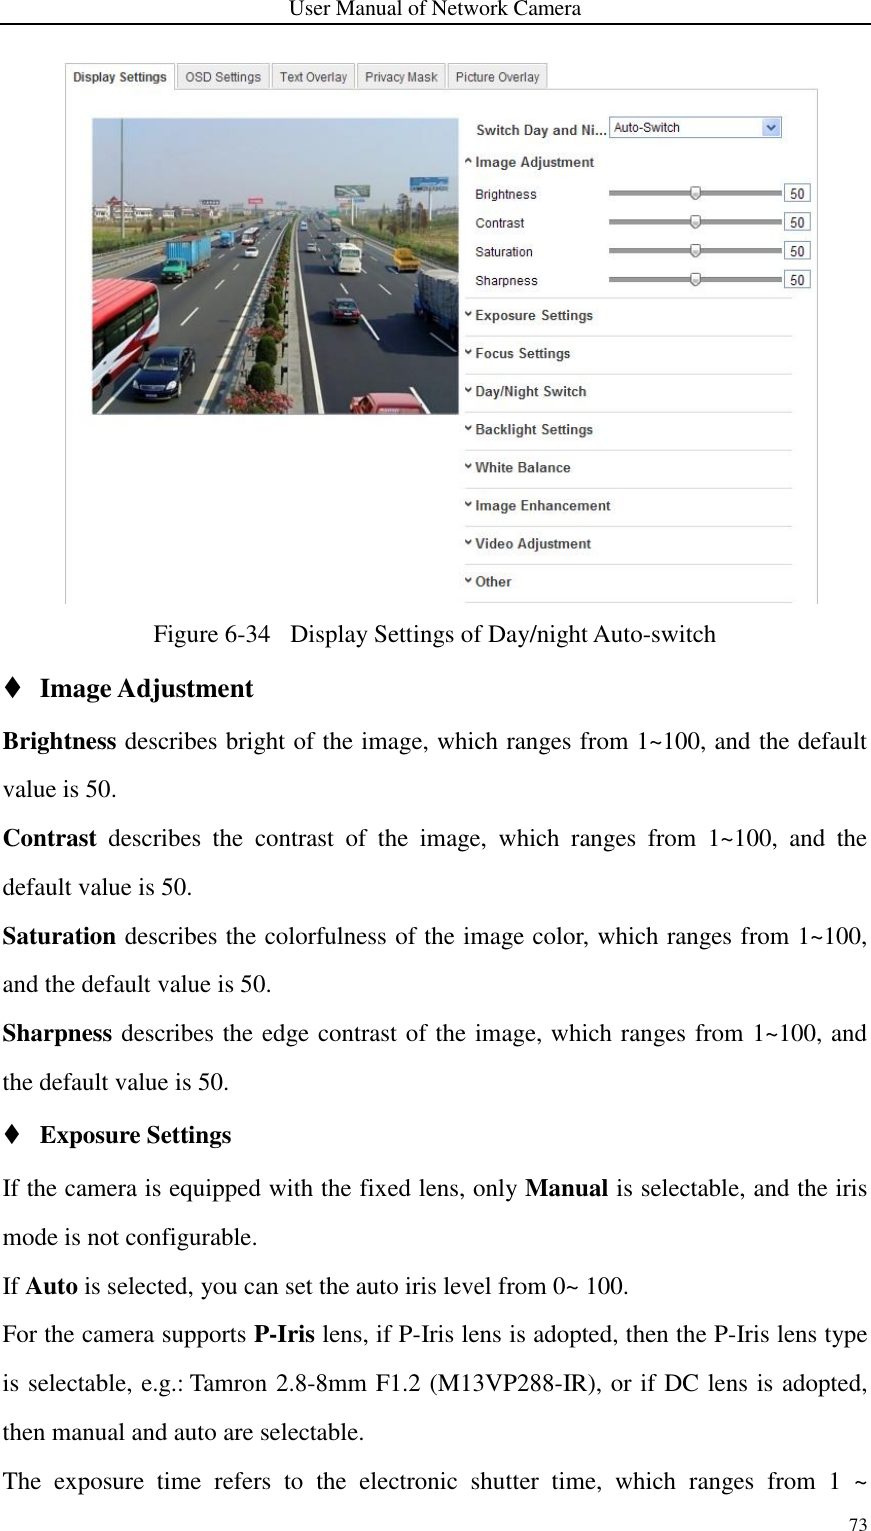 User Manual of Network Camera 73     Figure 6-34   Display Settings of Day/night Auto-switch  Image Adjustment Brightness describes bright of the image, which ranges from 1~100, and the default value is 50. Contrast  describes  the  contrast  of  the  image,  which  ranges  from  1~100,  and  the default value is 50. Saturation describes the colorfulness of the image color, which ranges from 1~100, and the default value is 50. Sharpness describes the edge contrast of the image, which ranges from 1~100, and the default value is 50.  Exposure Settings If the camera is equipped with the fixed lens, only Manual is selectable, and the iris mode is not configurable. If Auto is selected, you can set the auto iris level from 0~ 100.   For the camera supports P-Iris lens, if P-Iris lens is adopted, then the P-Iris lens type is selectable, e.g.: Tamron 2.8-8mm F1.2 (M13VP288-IR), or if DC lens is adopted, then manual and auto are selectable.     The  exposure  time  refers  to  the  electronic  shutter  time,  which  ranges  from  1  ~ 